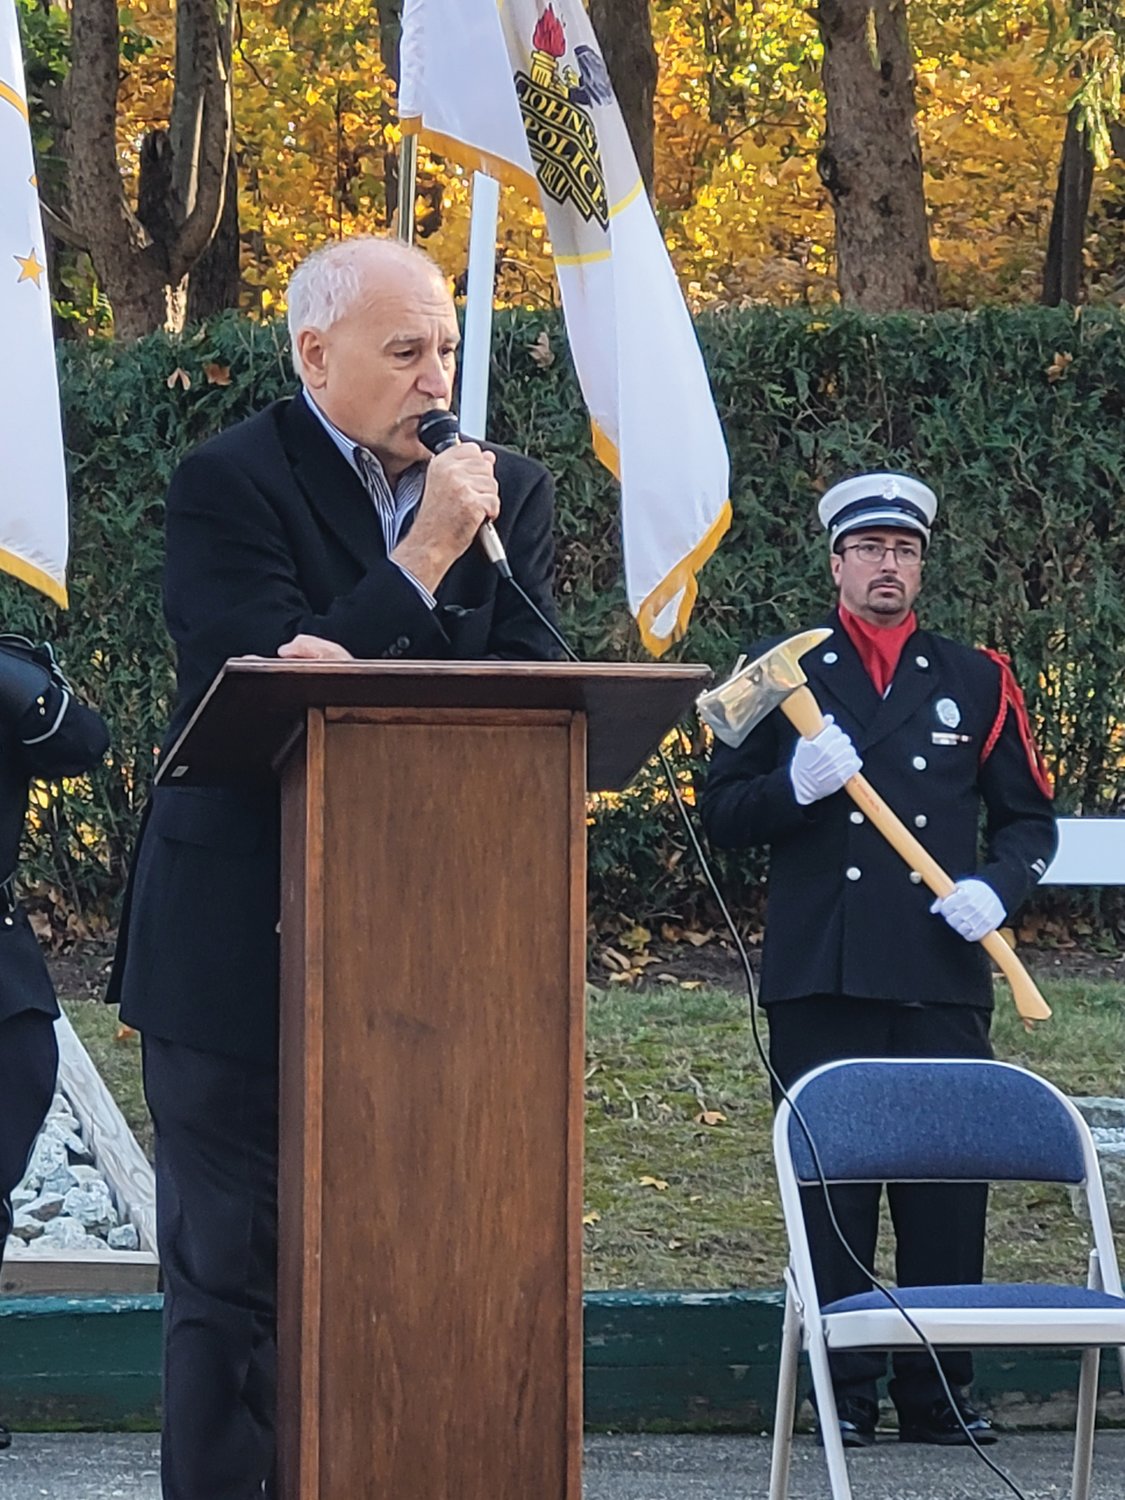 DAD, THANKS: Johnston Mayor Joseph M. Polisena addressed the crowd Wednesday morning, and shared stories about his late father, Joseph Anthony Polisena, a Korean War veteran.